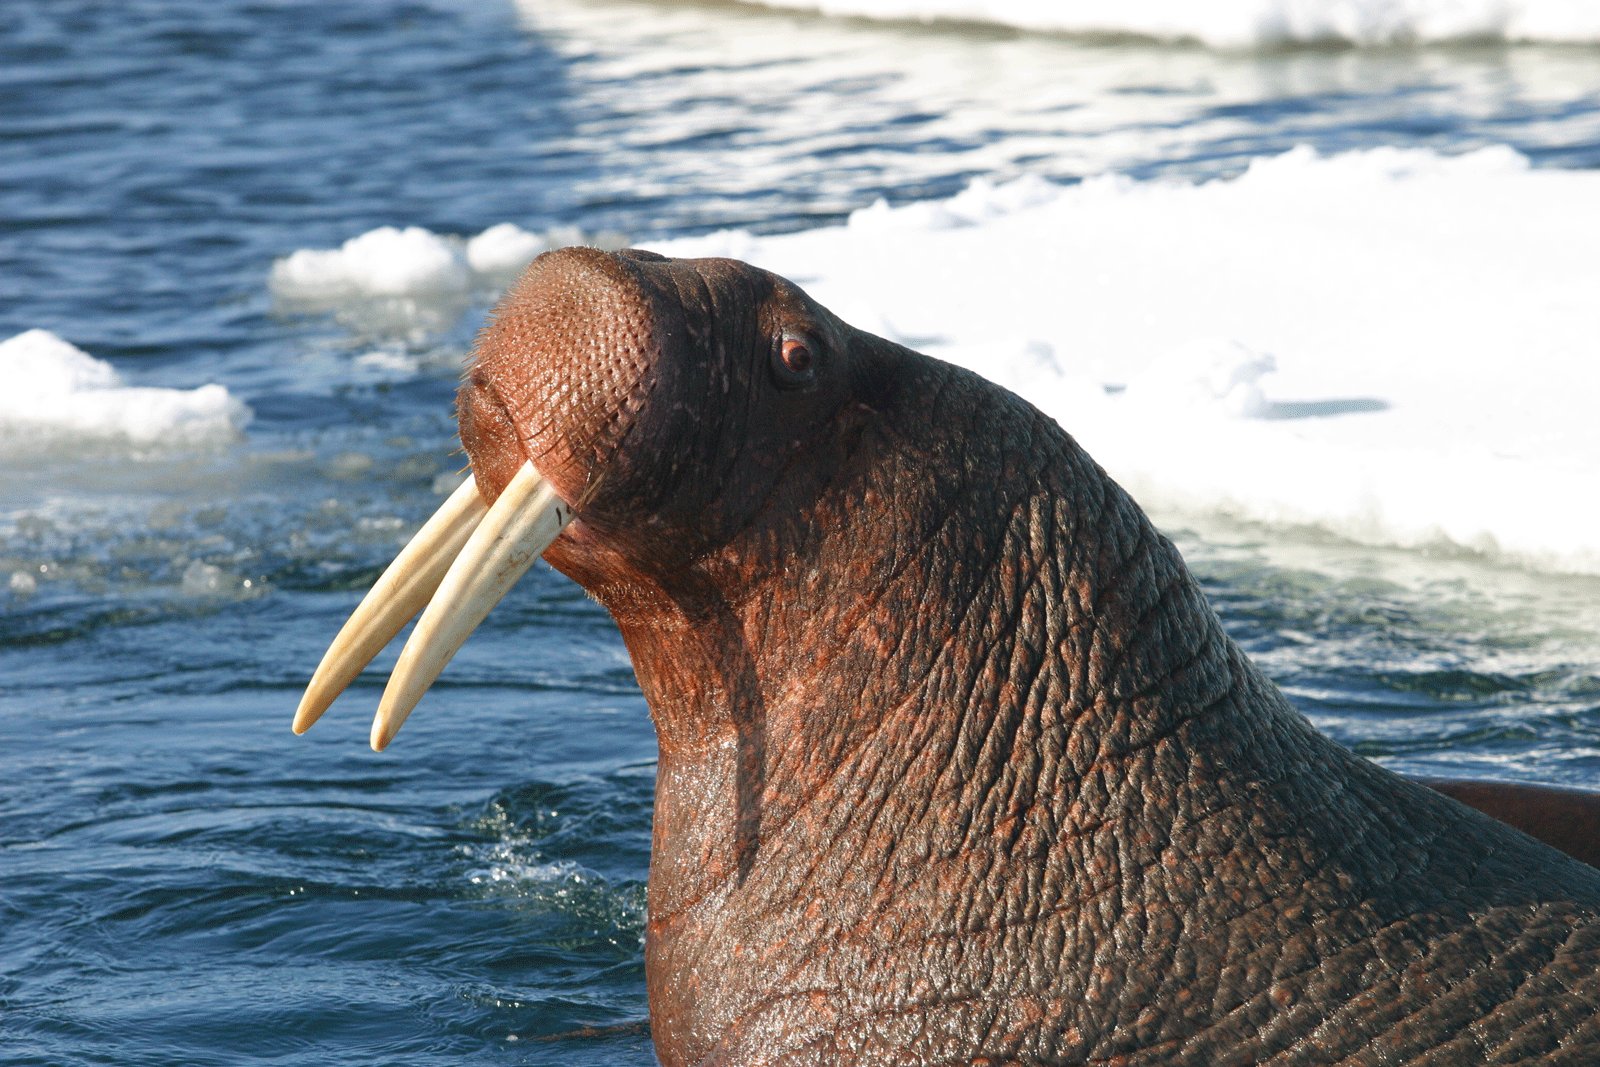 How to watch the walruses in North Slope